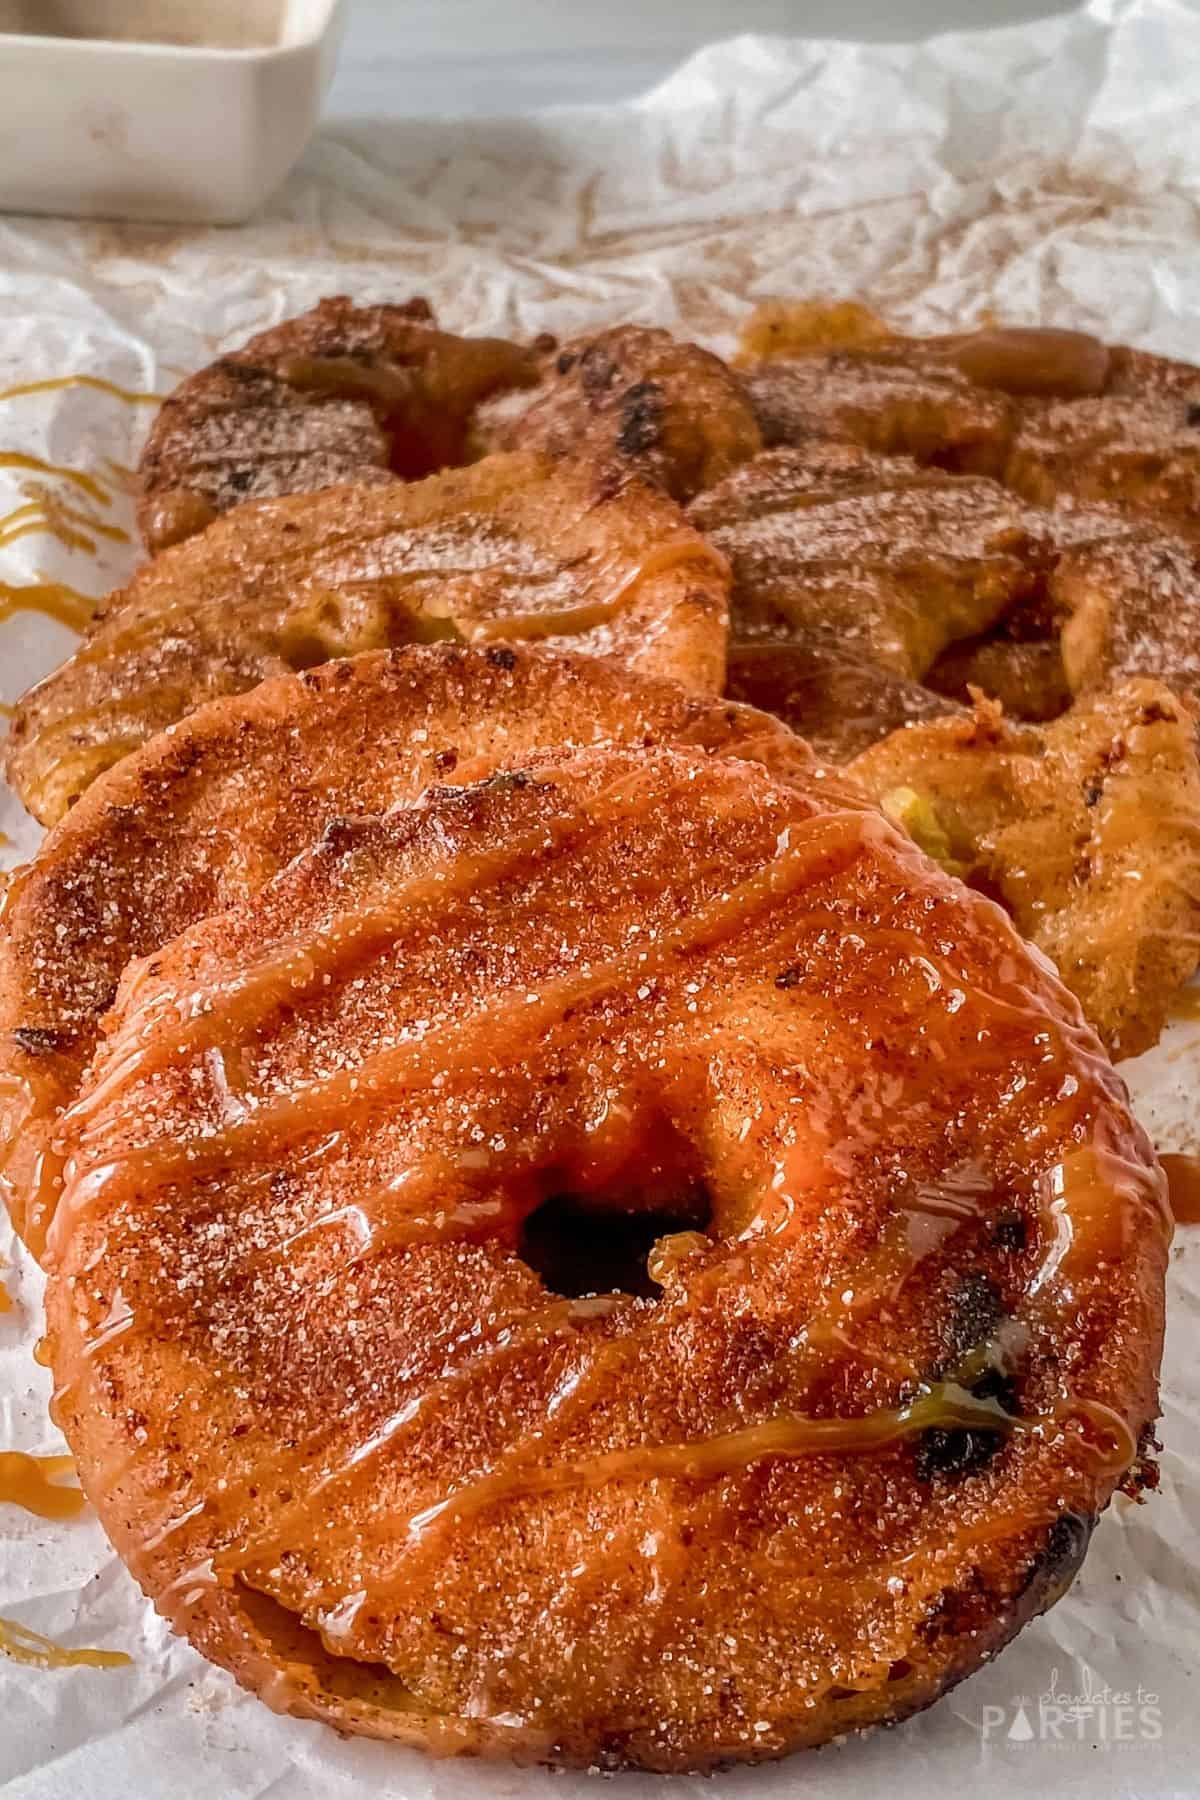 Close up of a fried apple ring with cinnamon sugar and caramel drizzle.